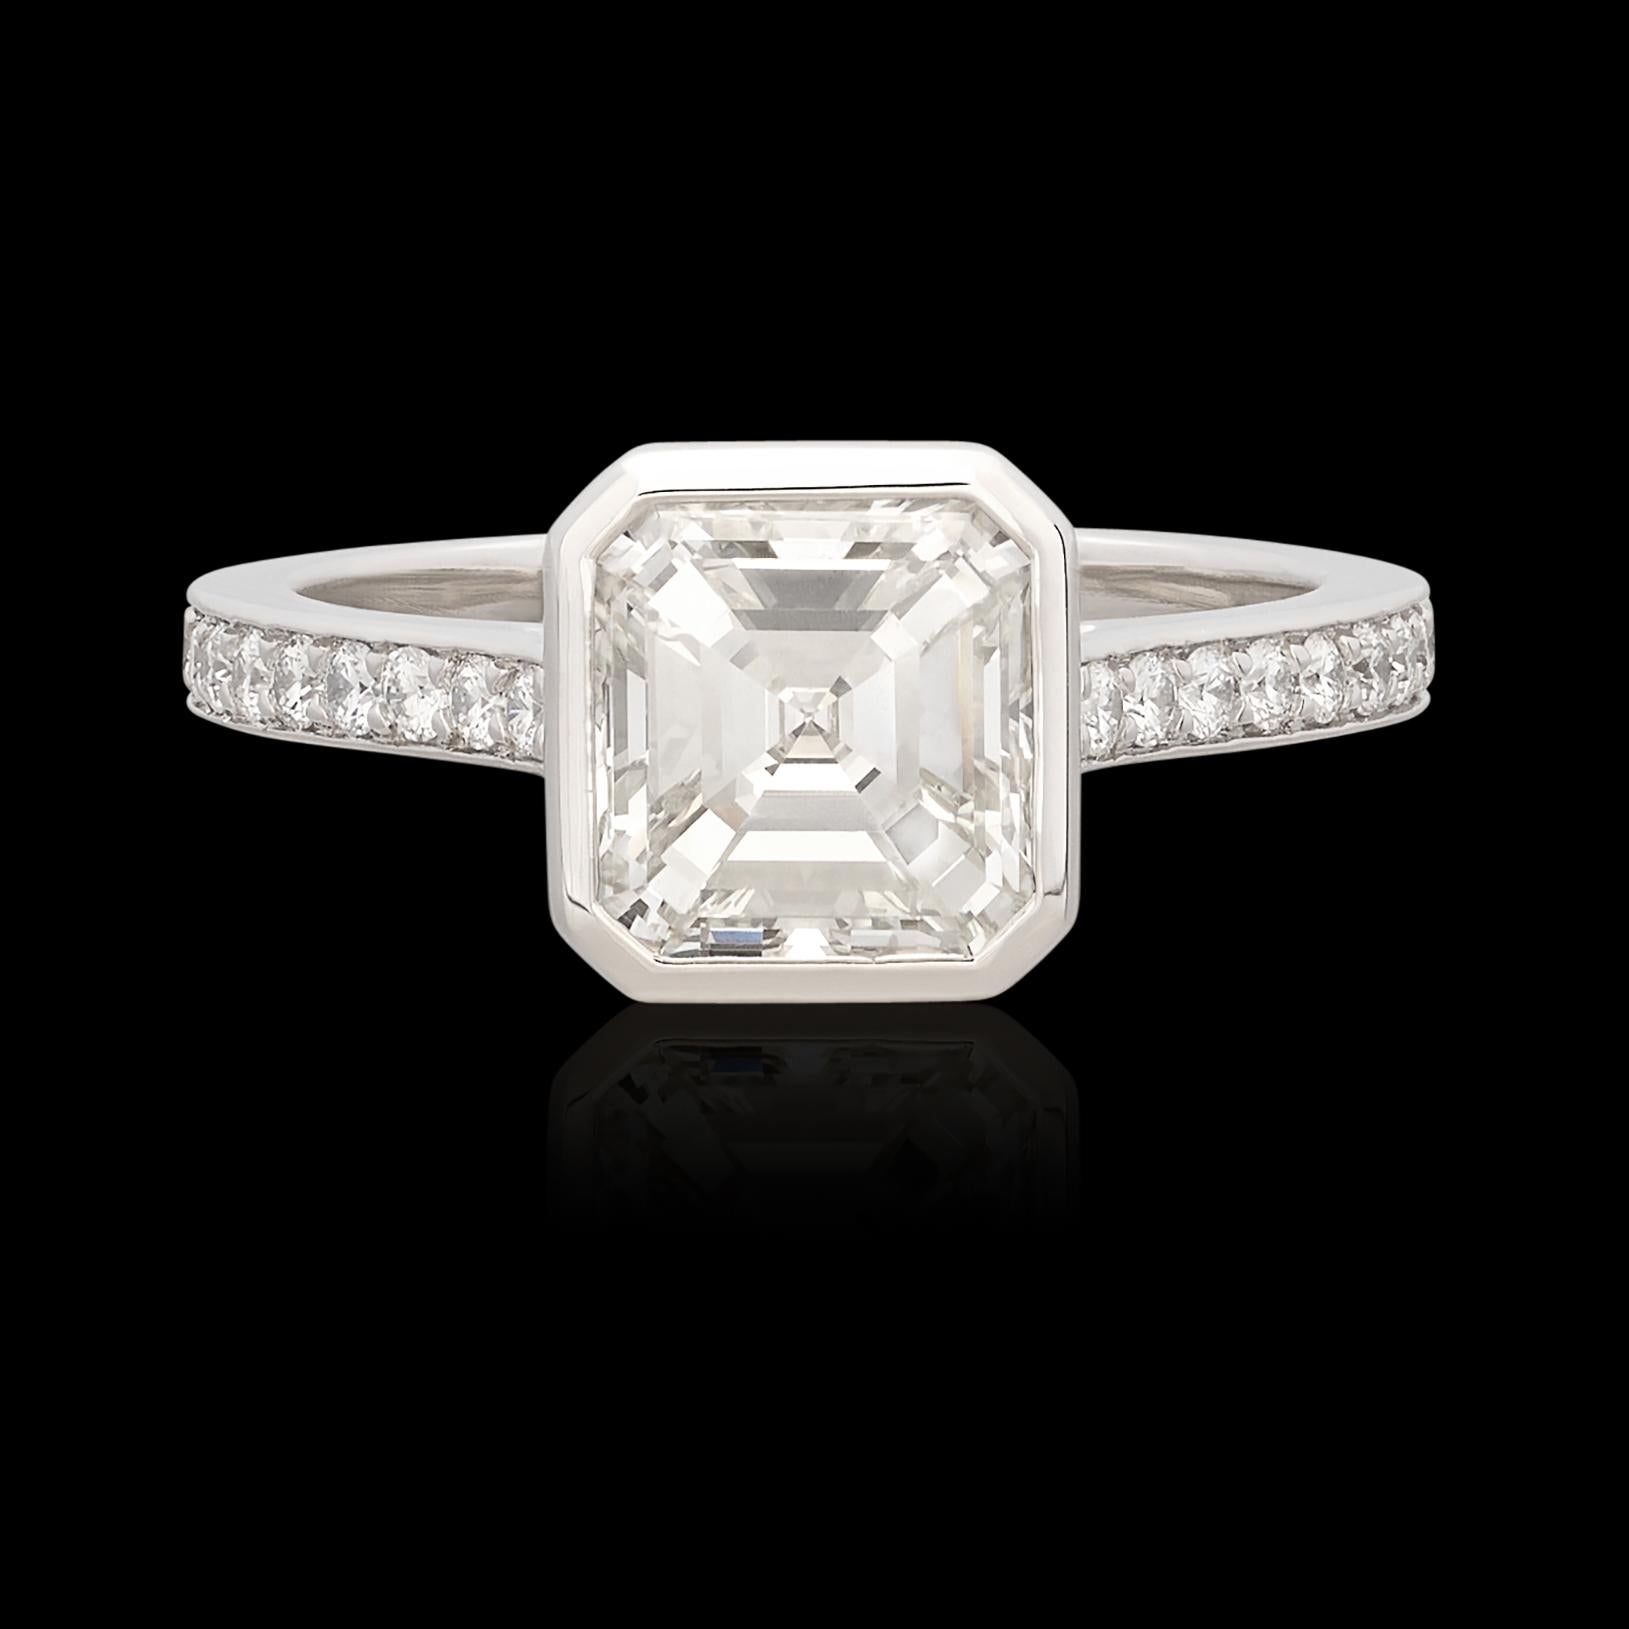 Phenomenal 2.14ct Asscher Cut Platinum Diamond Ring In New Condition For Sale In San Francisco, CA